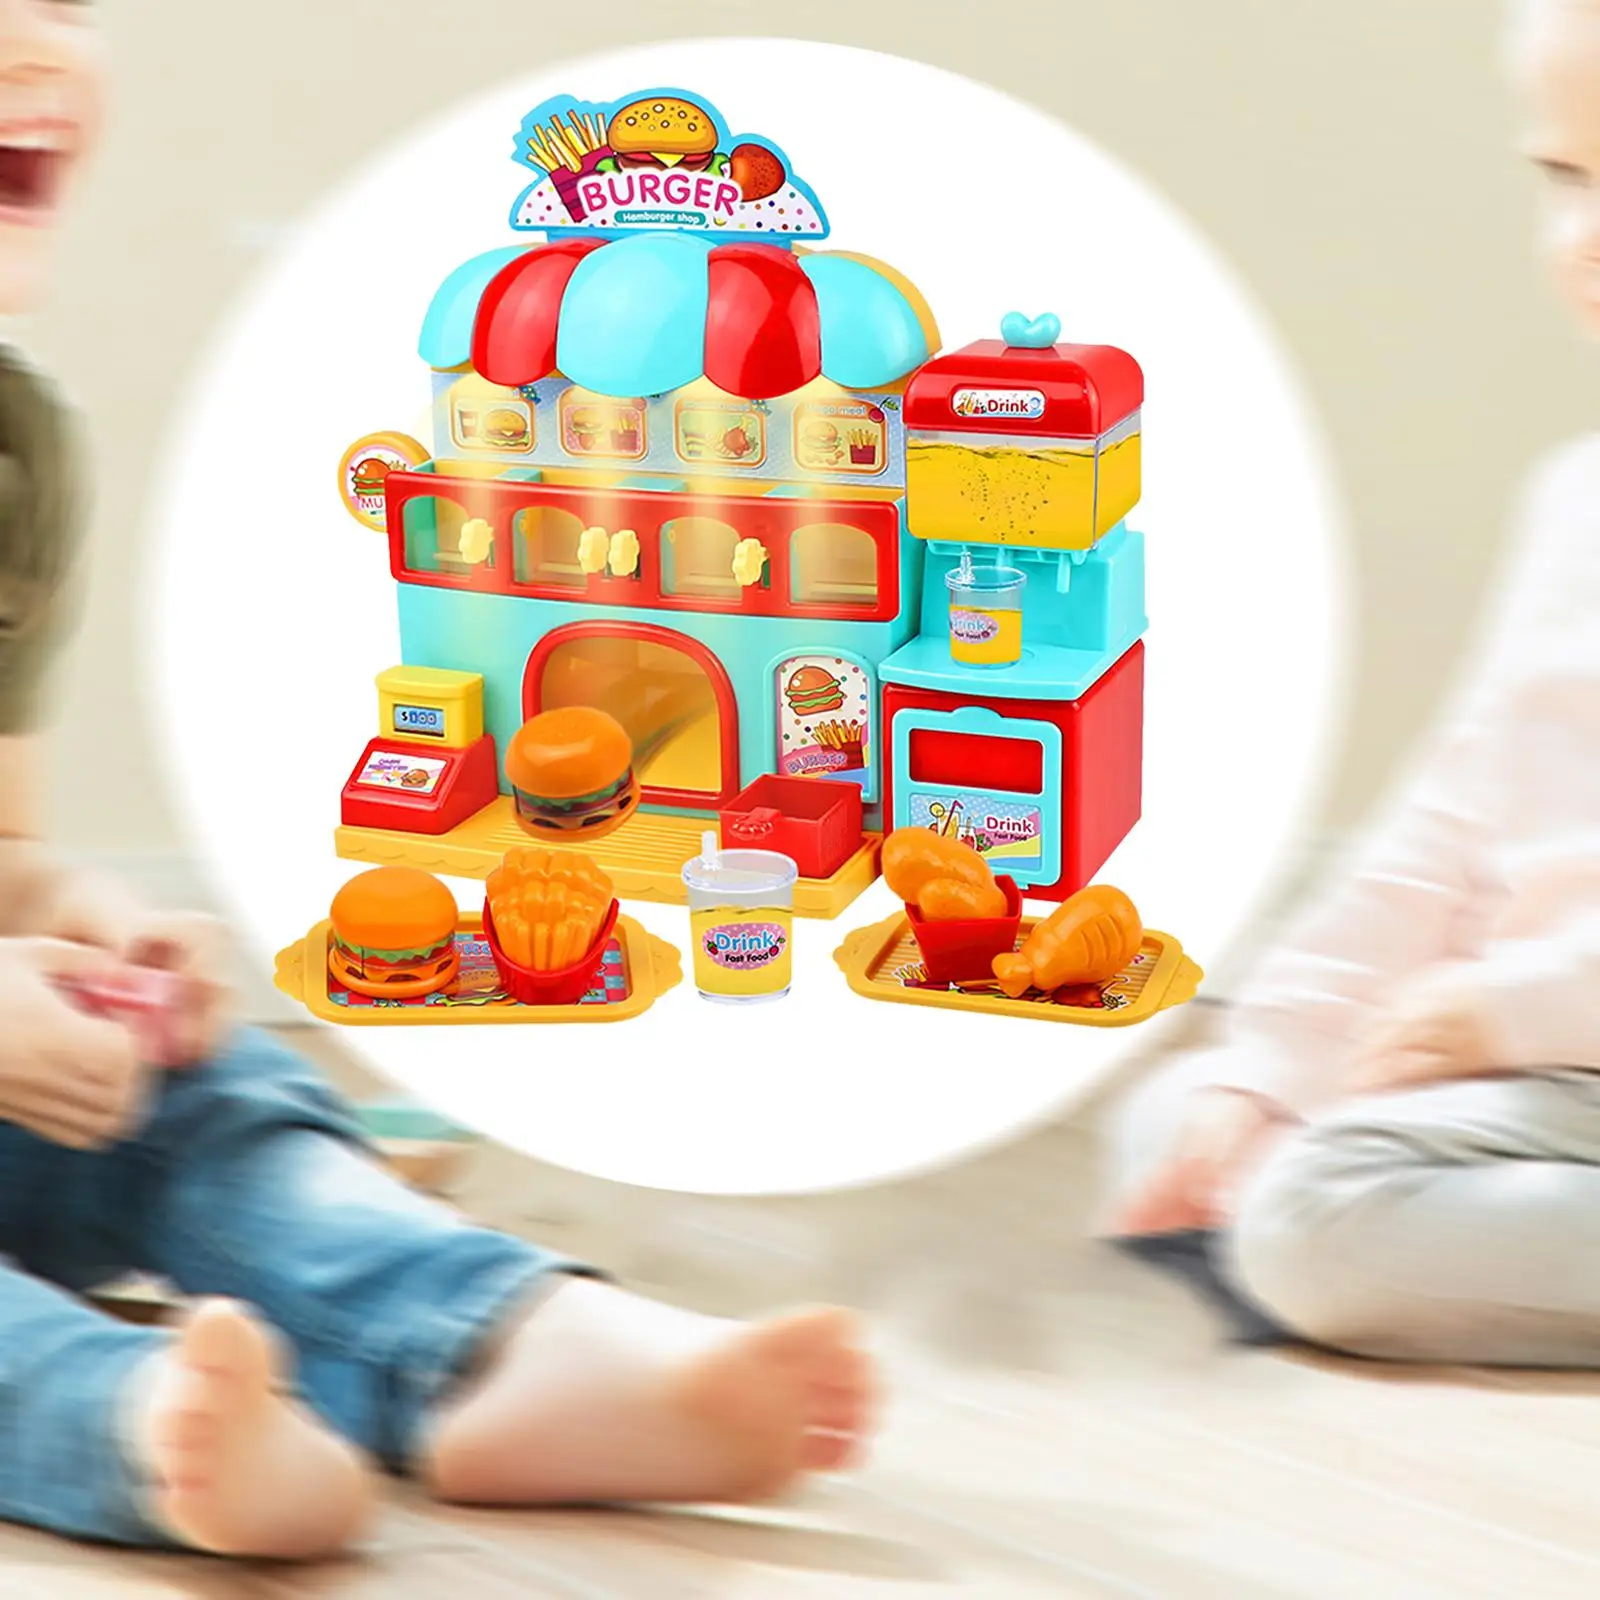 Fastfood Shop Toy Hamburger Pretend Play Toy Fastfood Kitchen Playset Kitchen Toys Burgers Shop Toy for Boys Girls Kids Gift